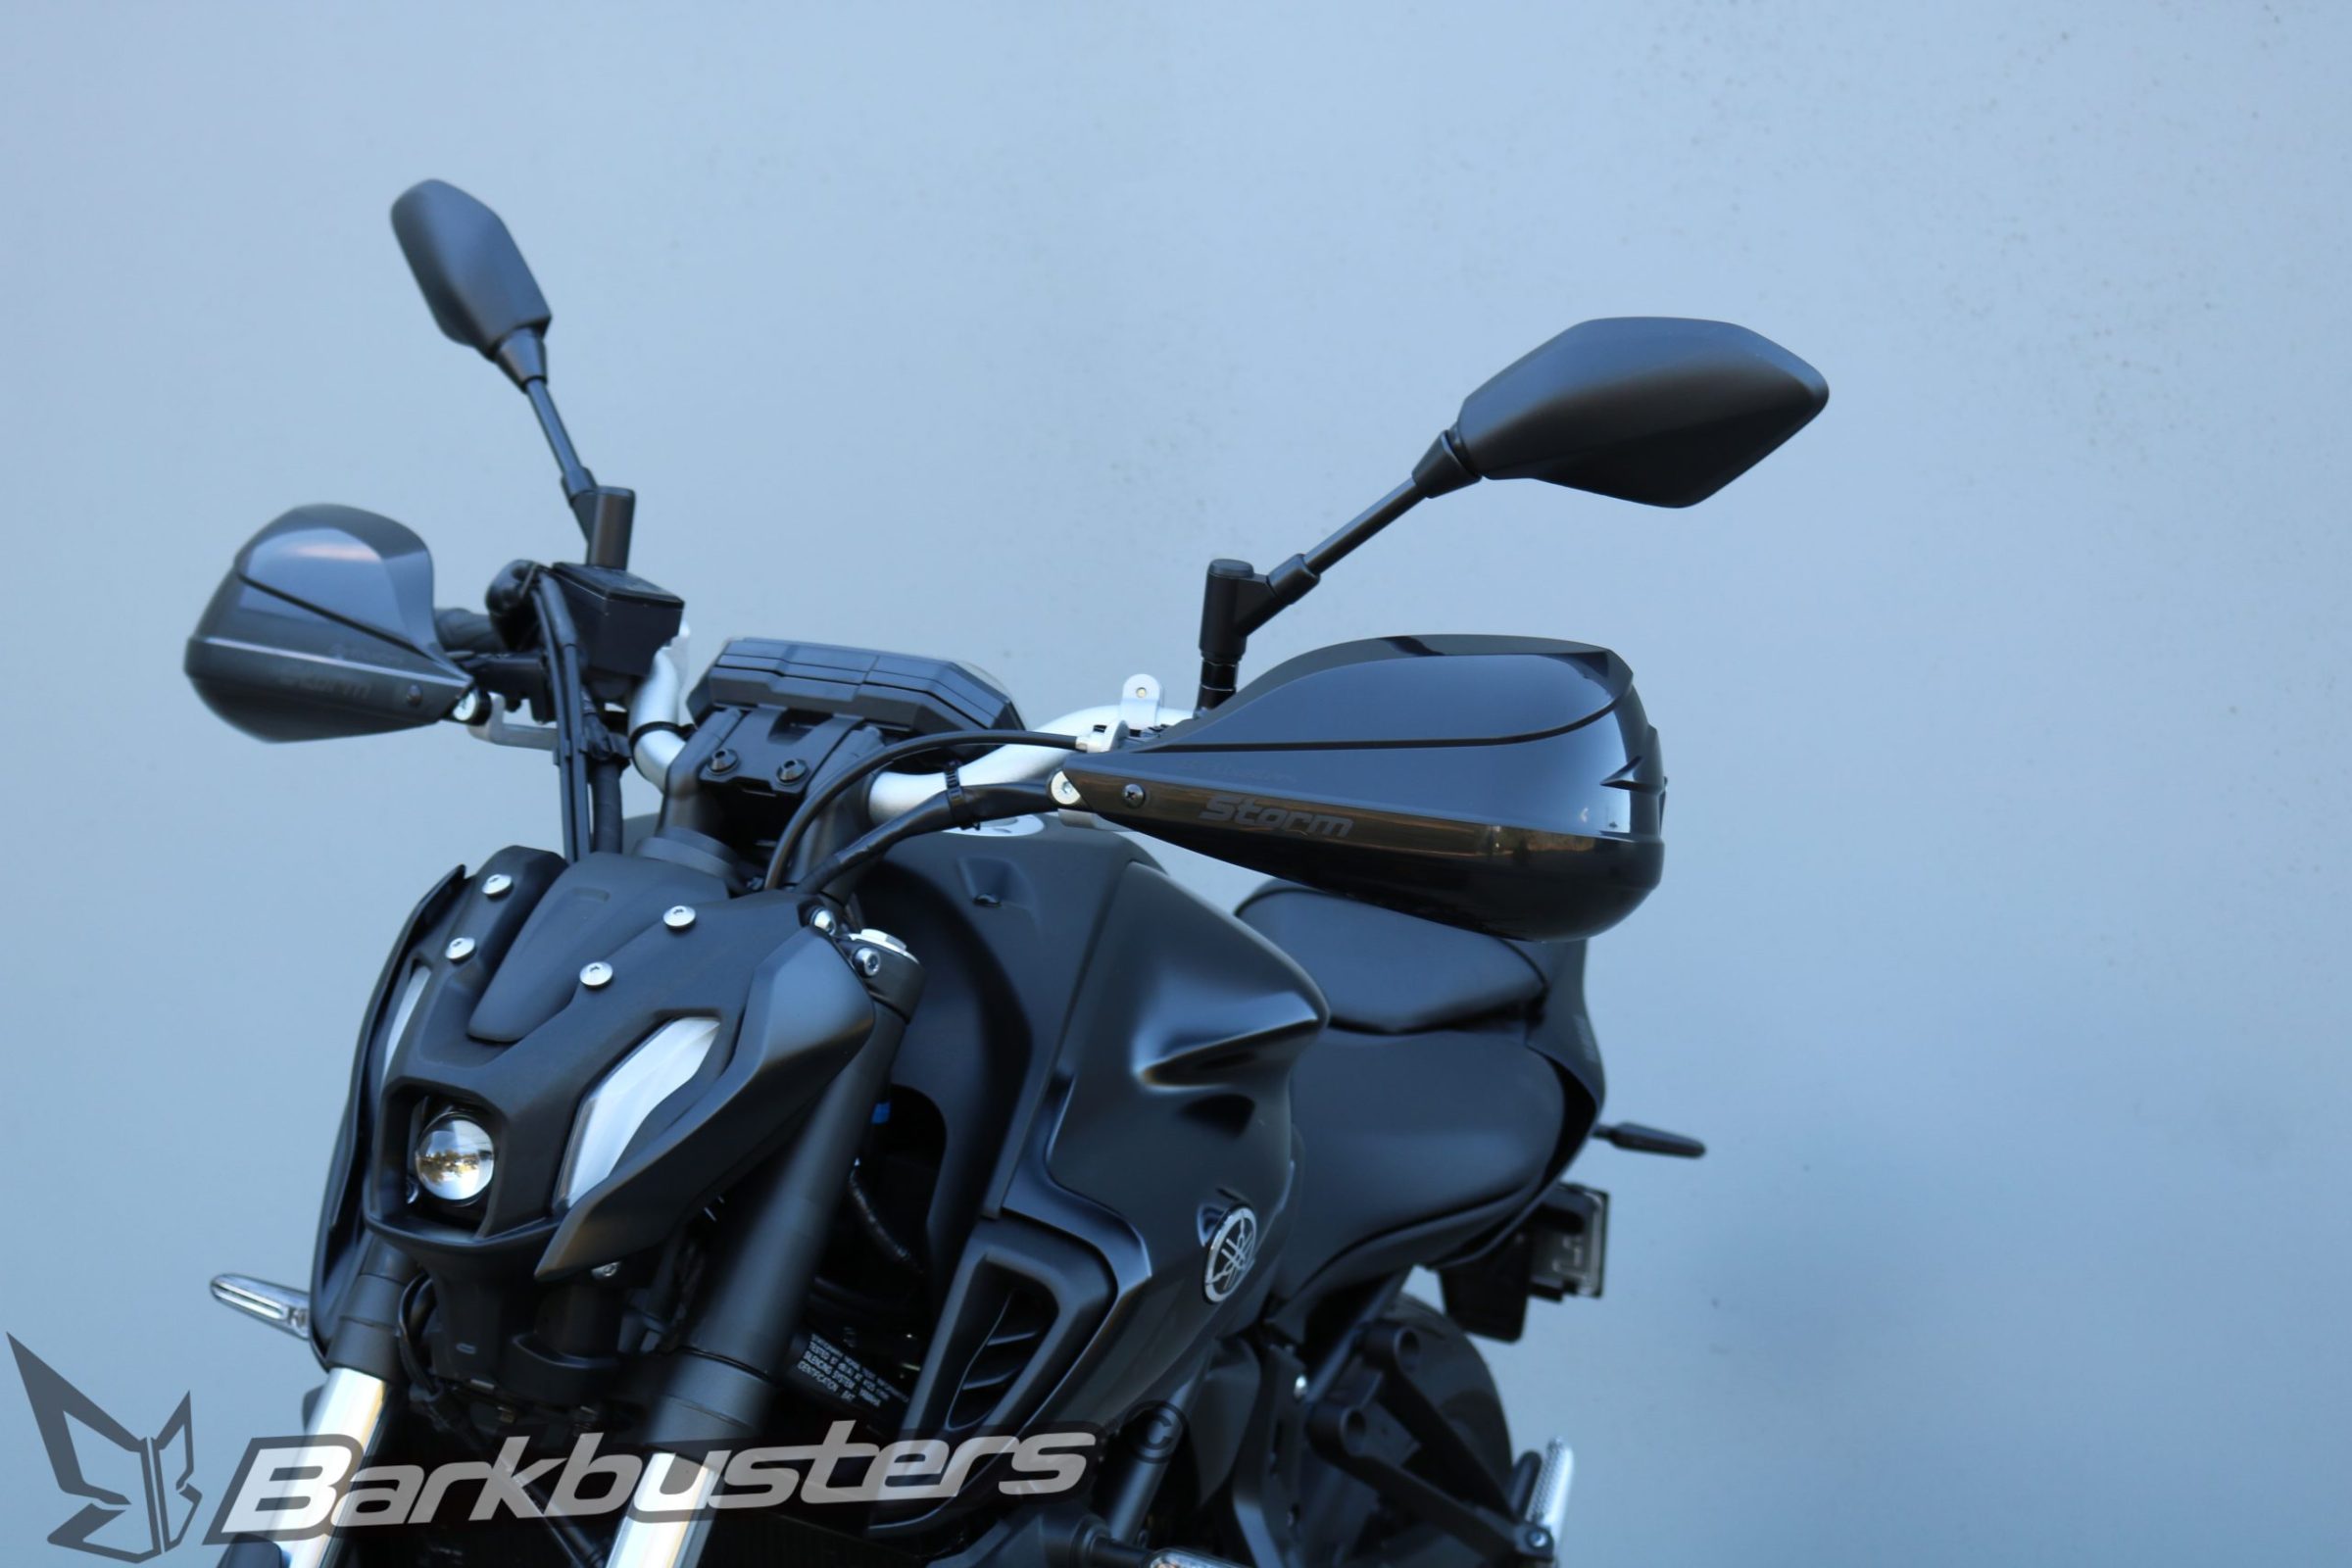 Yamaha MT 07 (2021) fitted with Barkbusters STORM Handguards